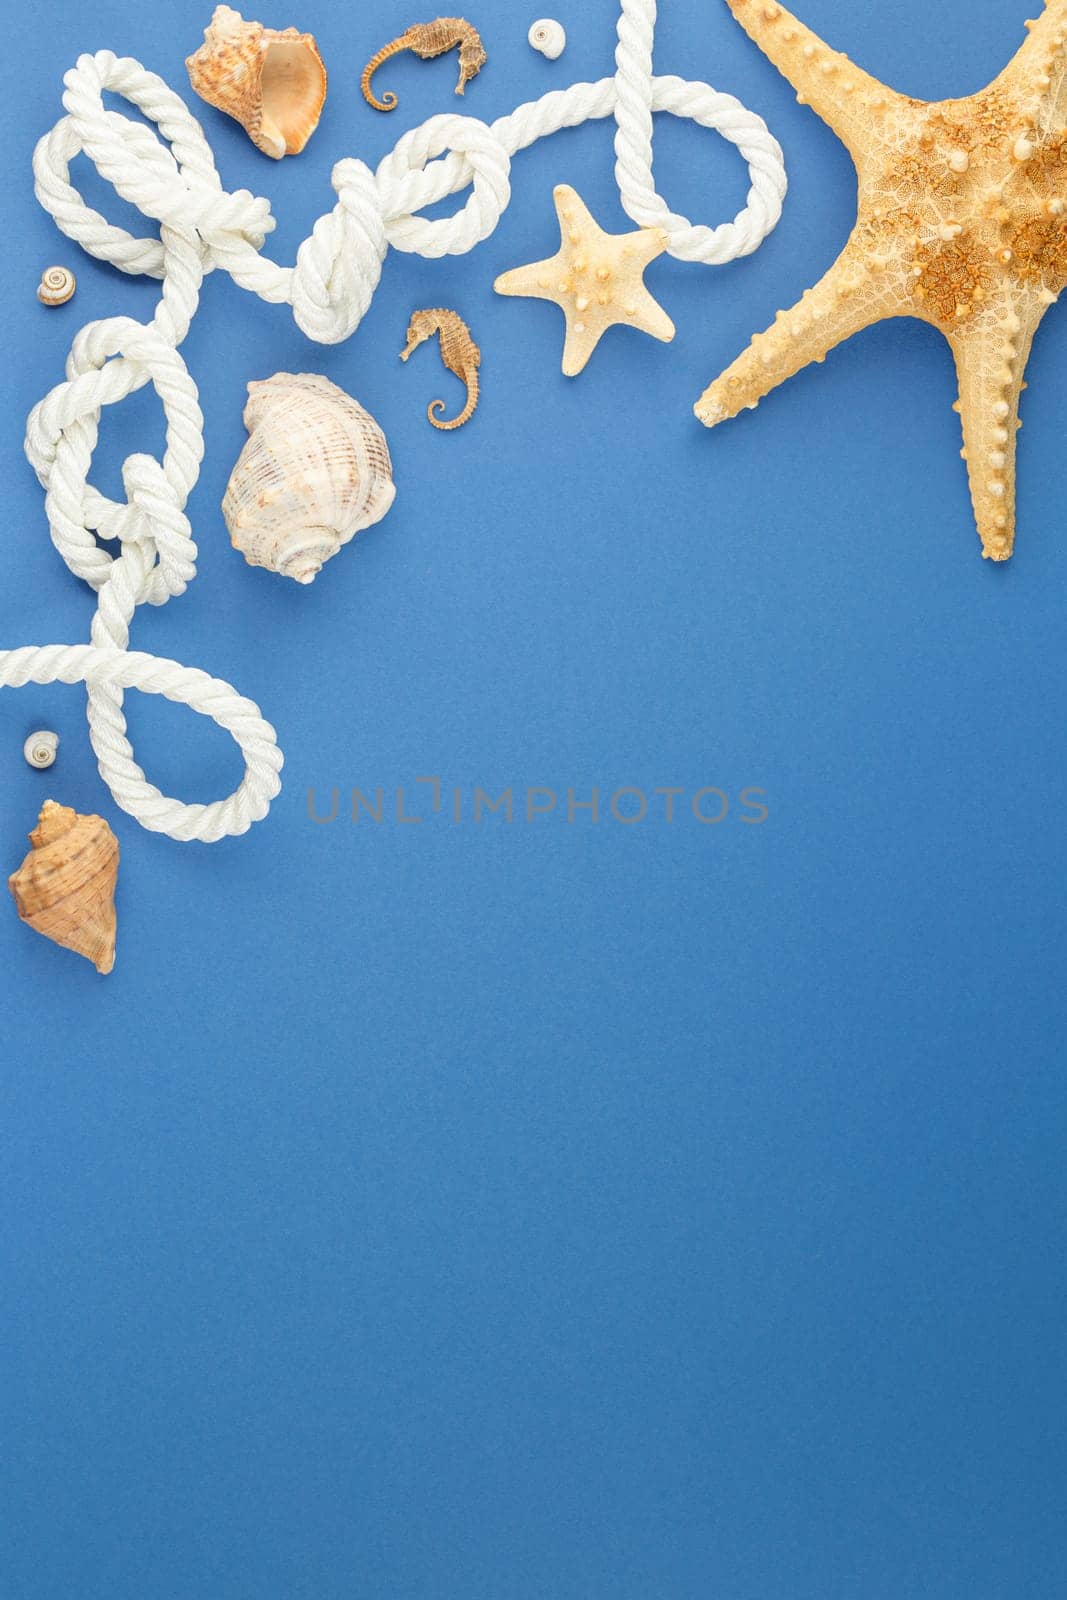 Starfish with seashells on blue background. Photo top view with copy space. Concept of beach holiday on the coast. Marine rope with seahorse. Flat lay.